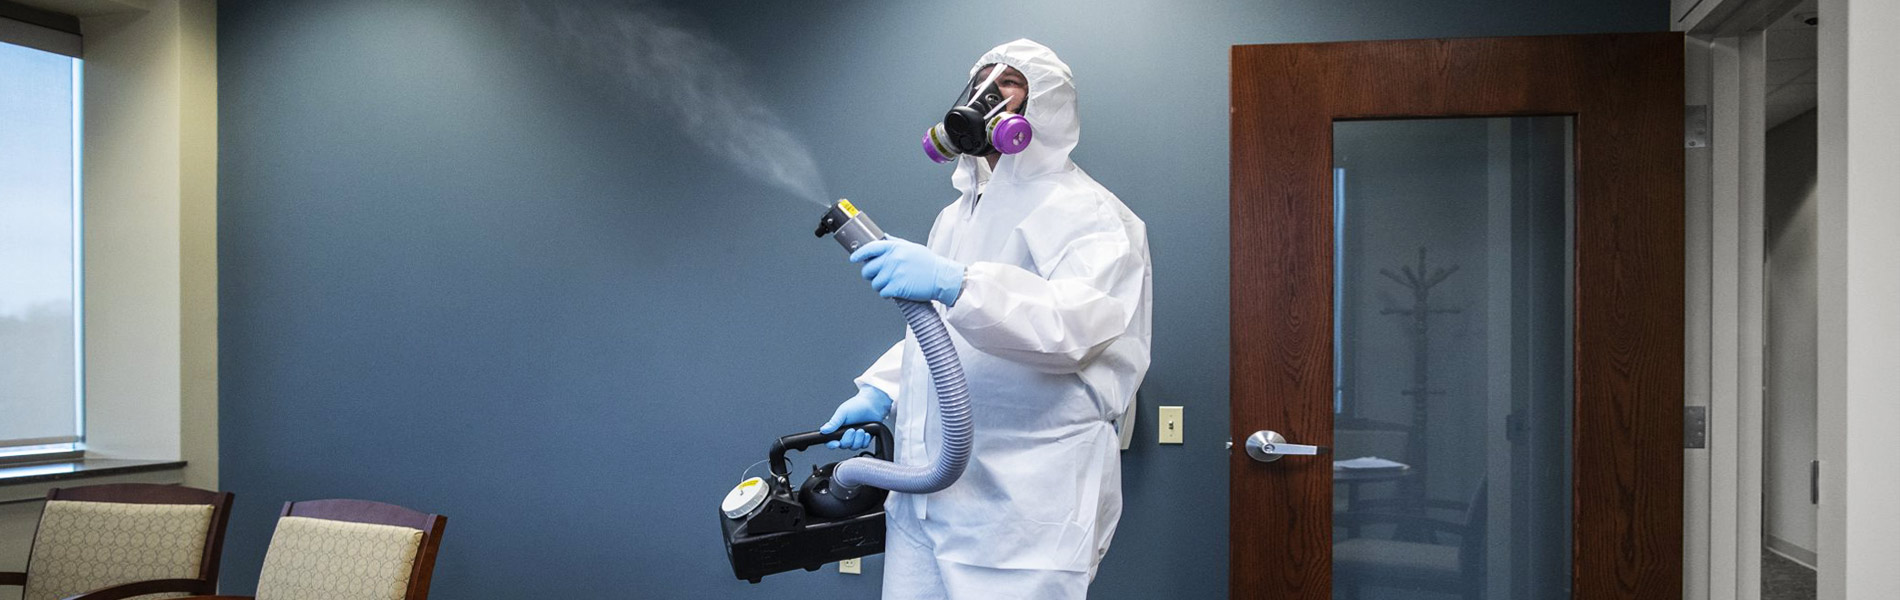 Man with protective suit spraying house